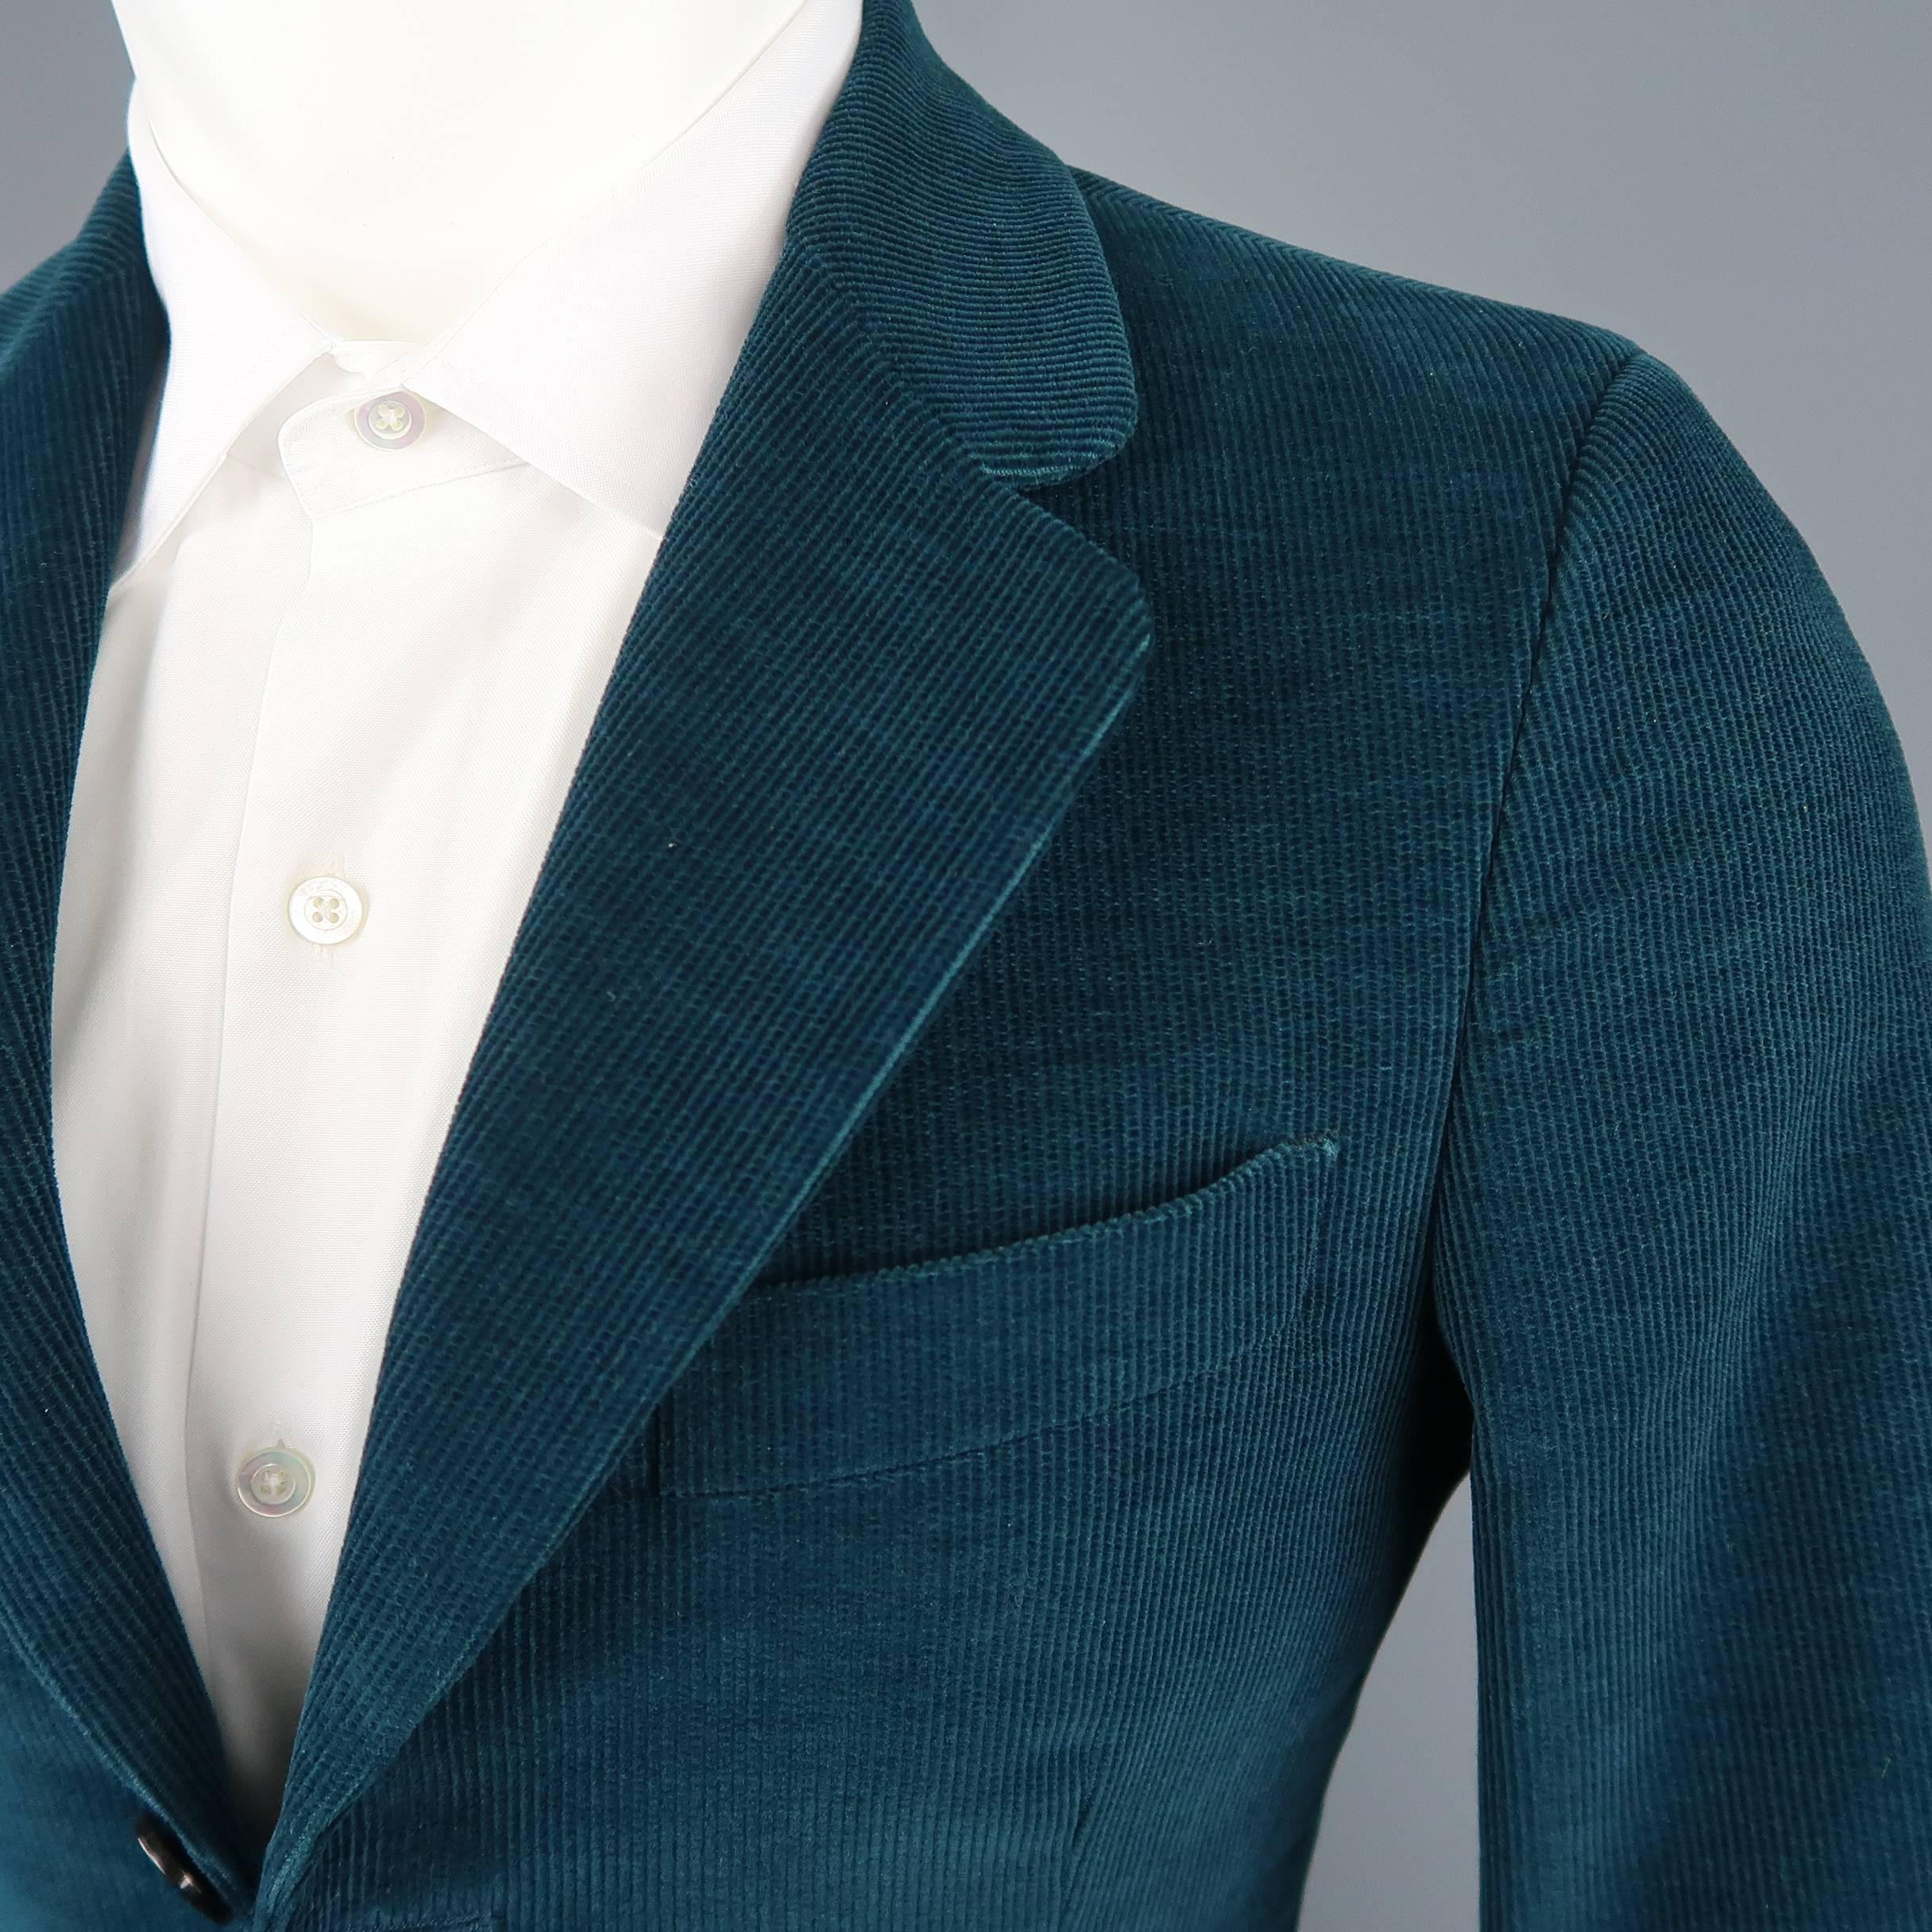 UMIT BENAN sport coat comes in dark teal green textured corduroy with a notch lapel, three button closure, and functional button cuffs. Made in Italy.
 
Good Pre-Owned Condition.
Marked: IT 44
 
Measurements:
 
Shoulder: 16 in.
Chest: 39 in.
Sleeve: